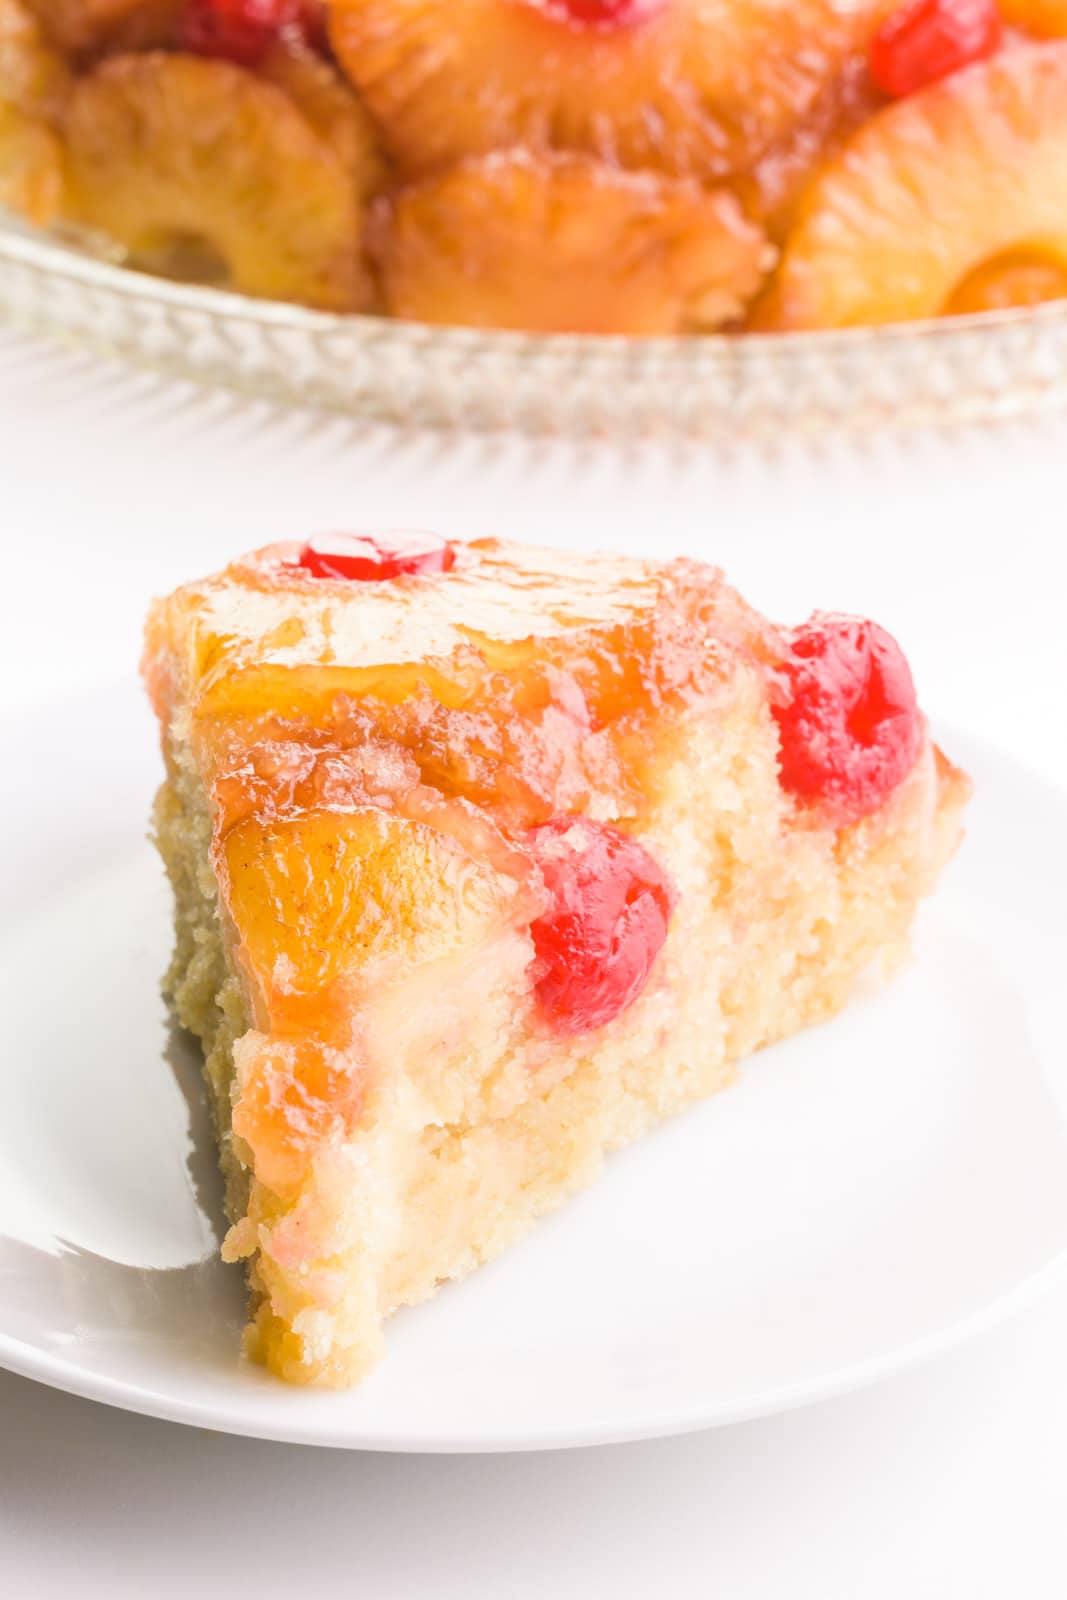 A slice of vegan pineapple upside down cake sits in front of the rest of the cake.